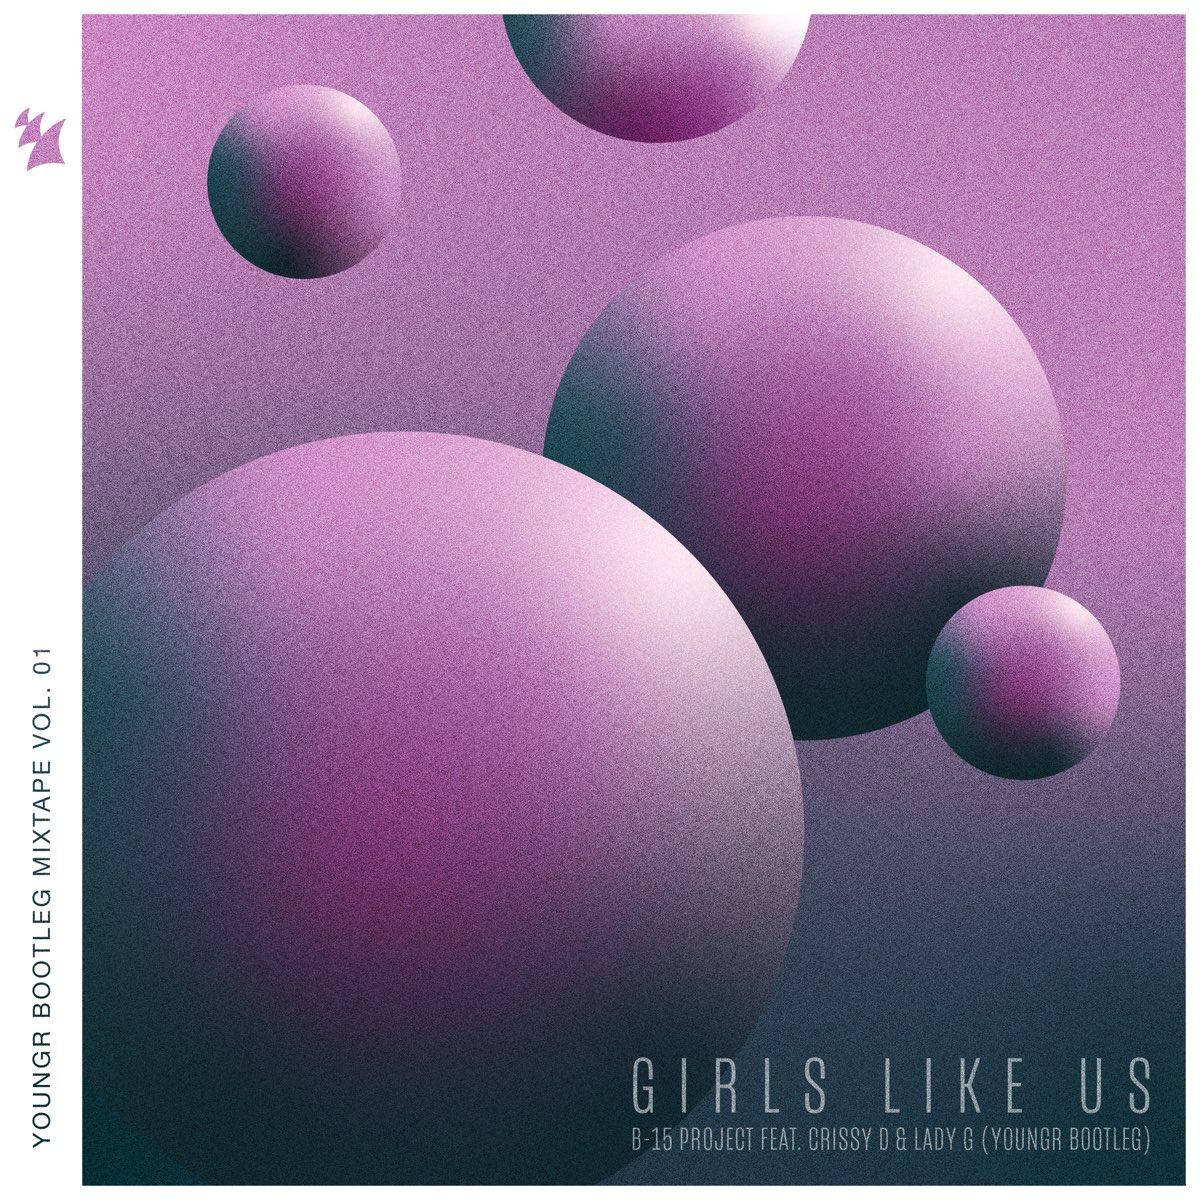 ‎girls Like Us Feat Crissy D And Lady G Youngr Bootleg Single Par B 15 Project Sur Apple Music 5821